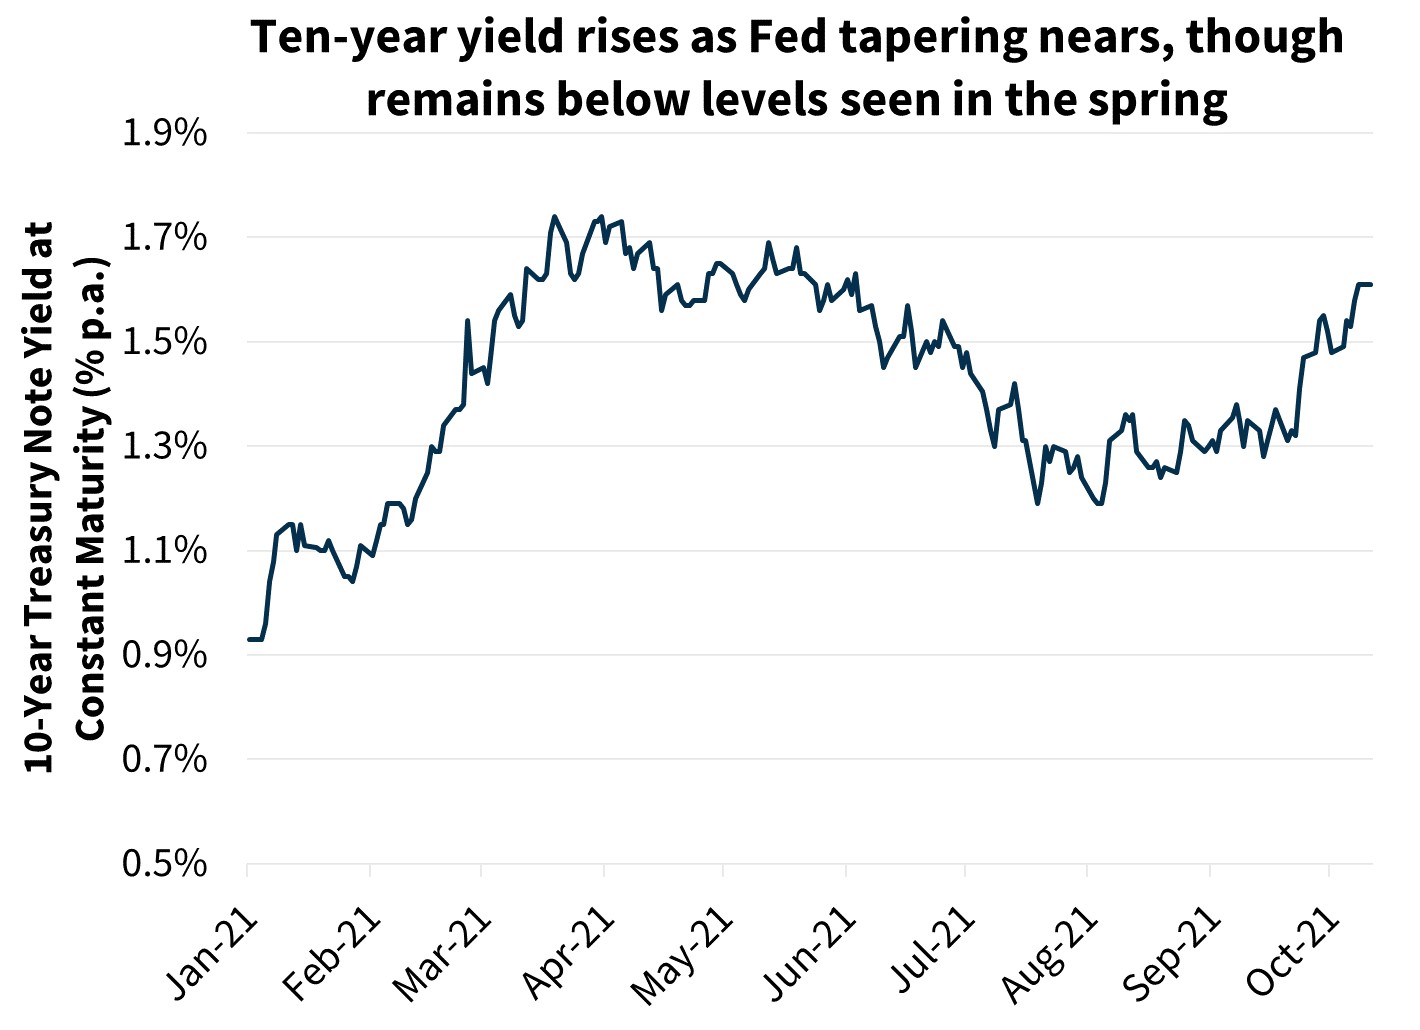  Ten-year yield rises as Fed tapering nears though remains below levels seen in the spring 